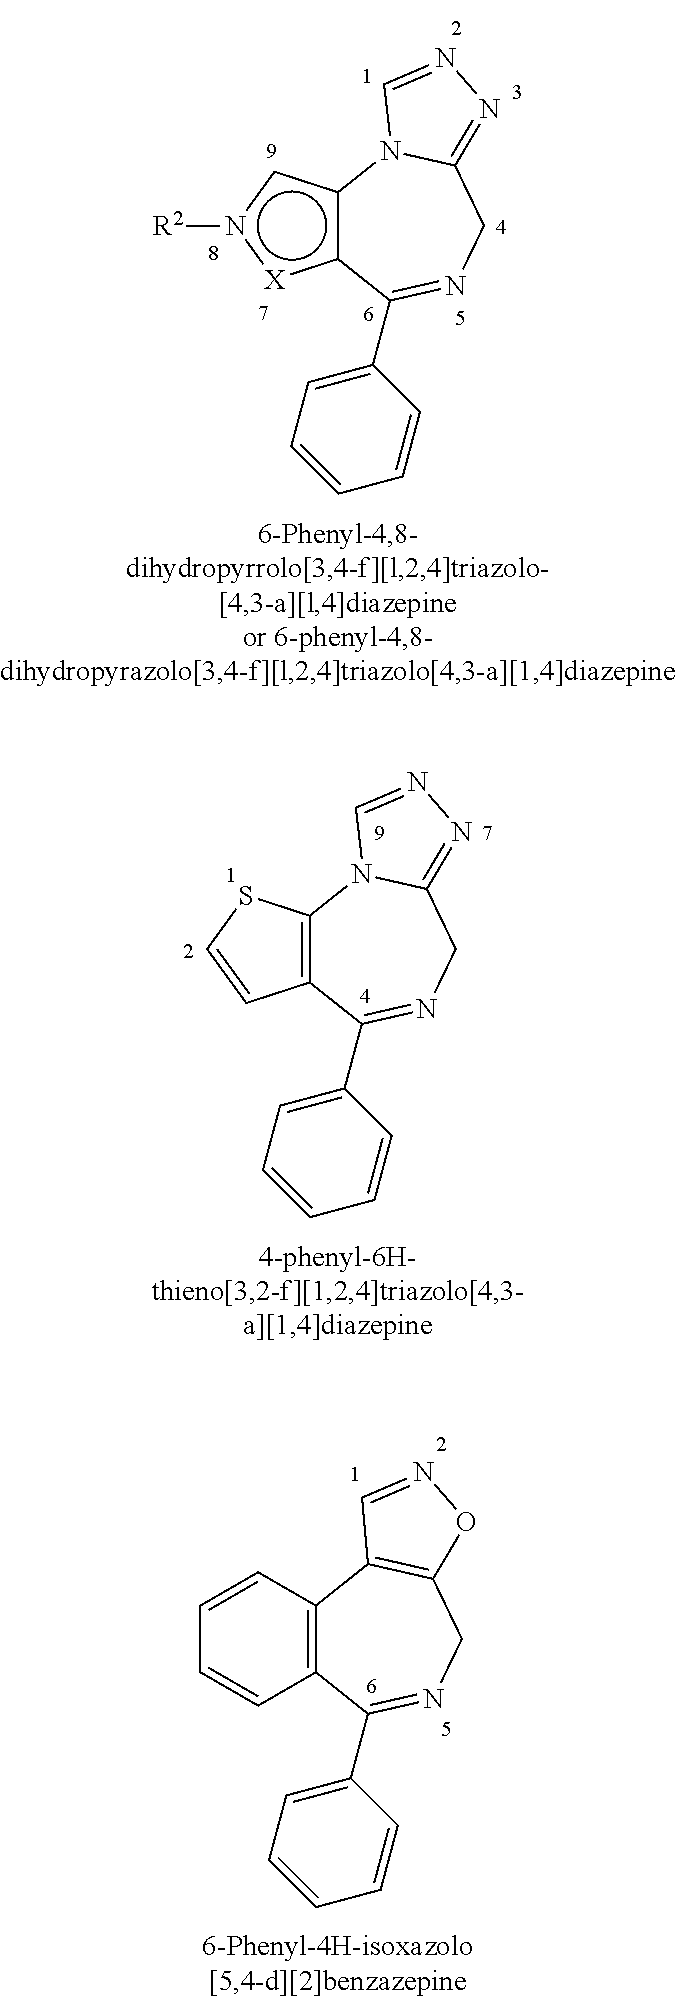 4-substituted pyrrolo- and pyrazolo-diazepines